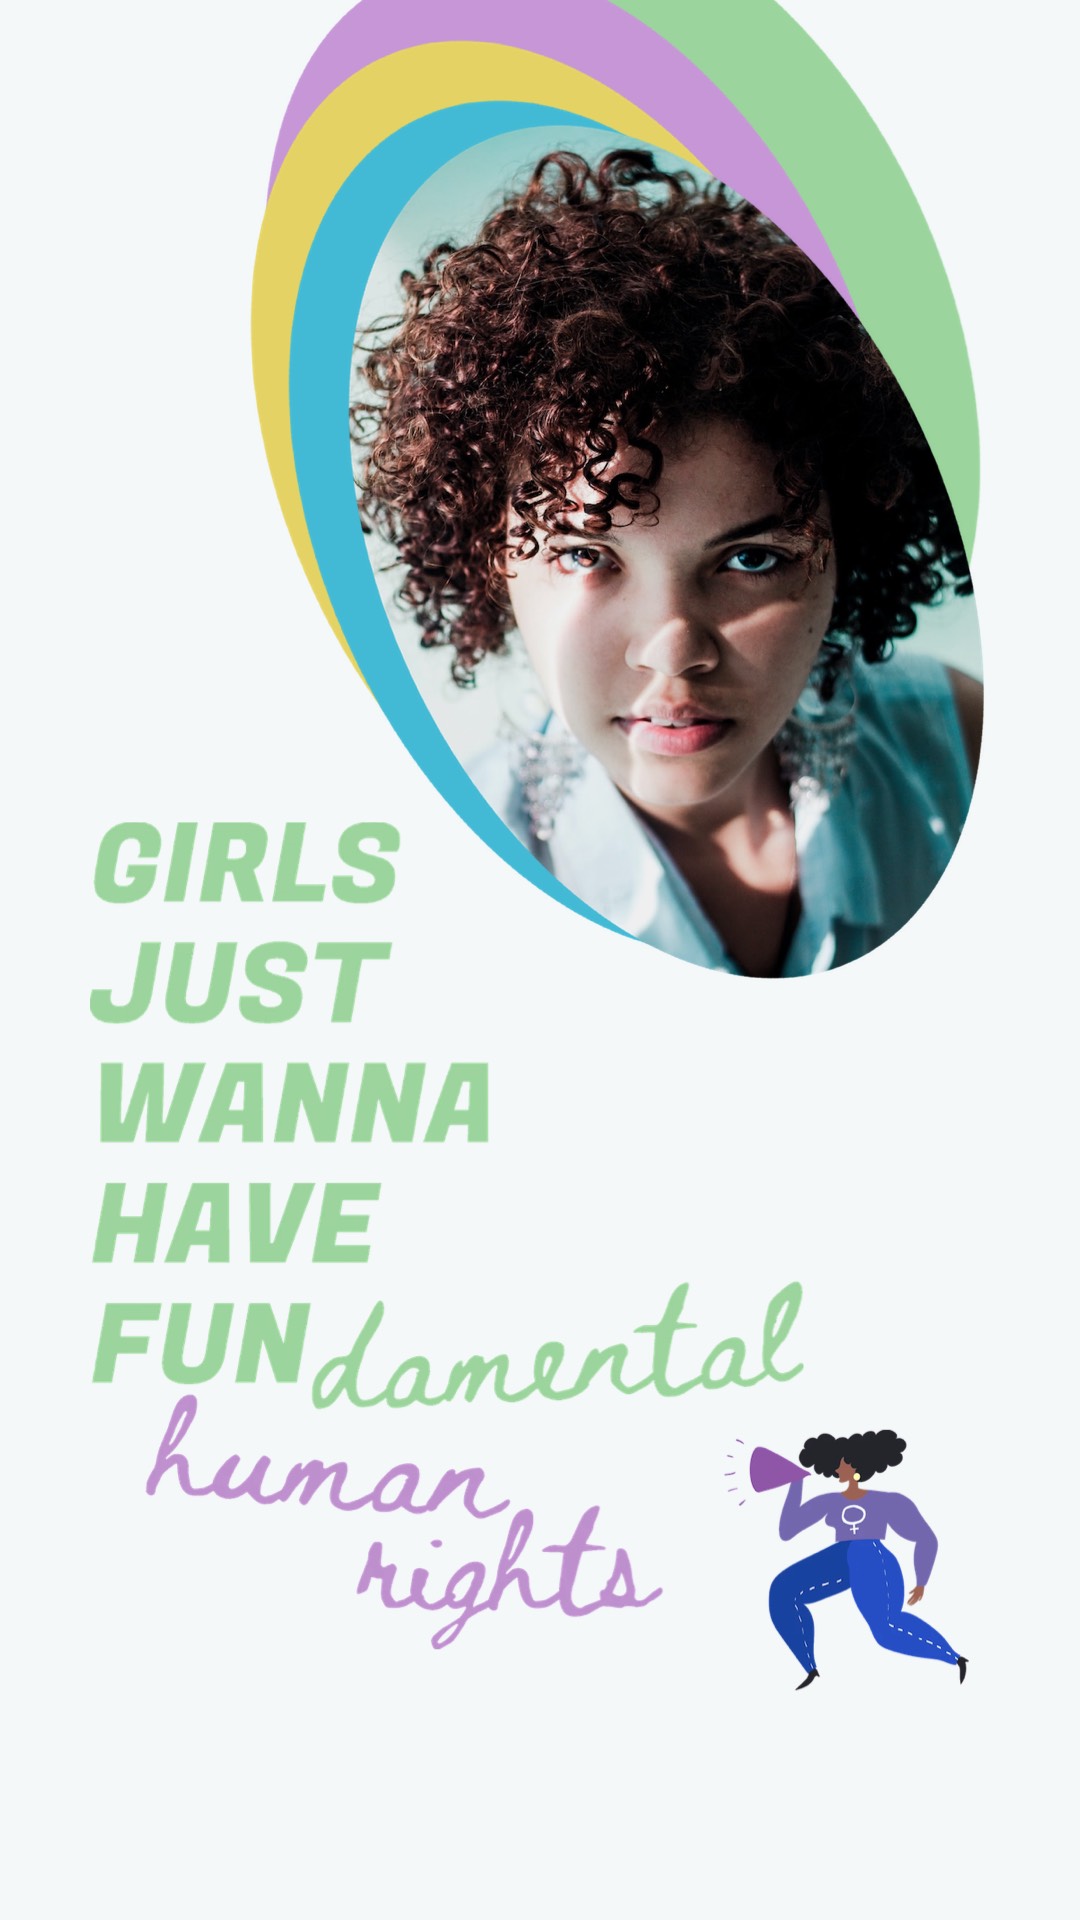 A Woman With Curly Hair Is Featured In A Poster Women S Day Template